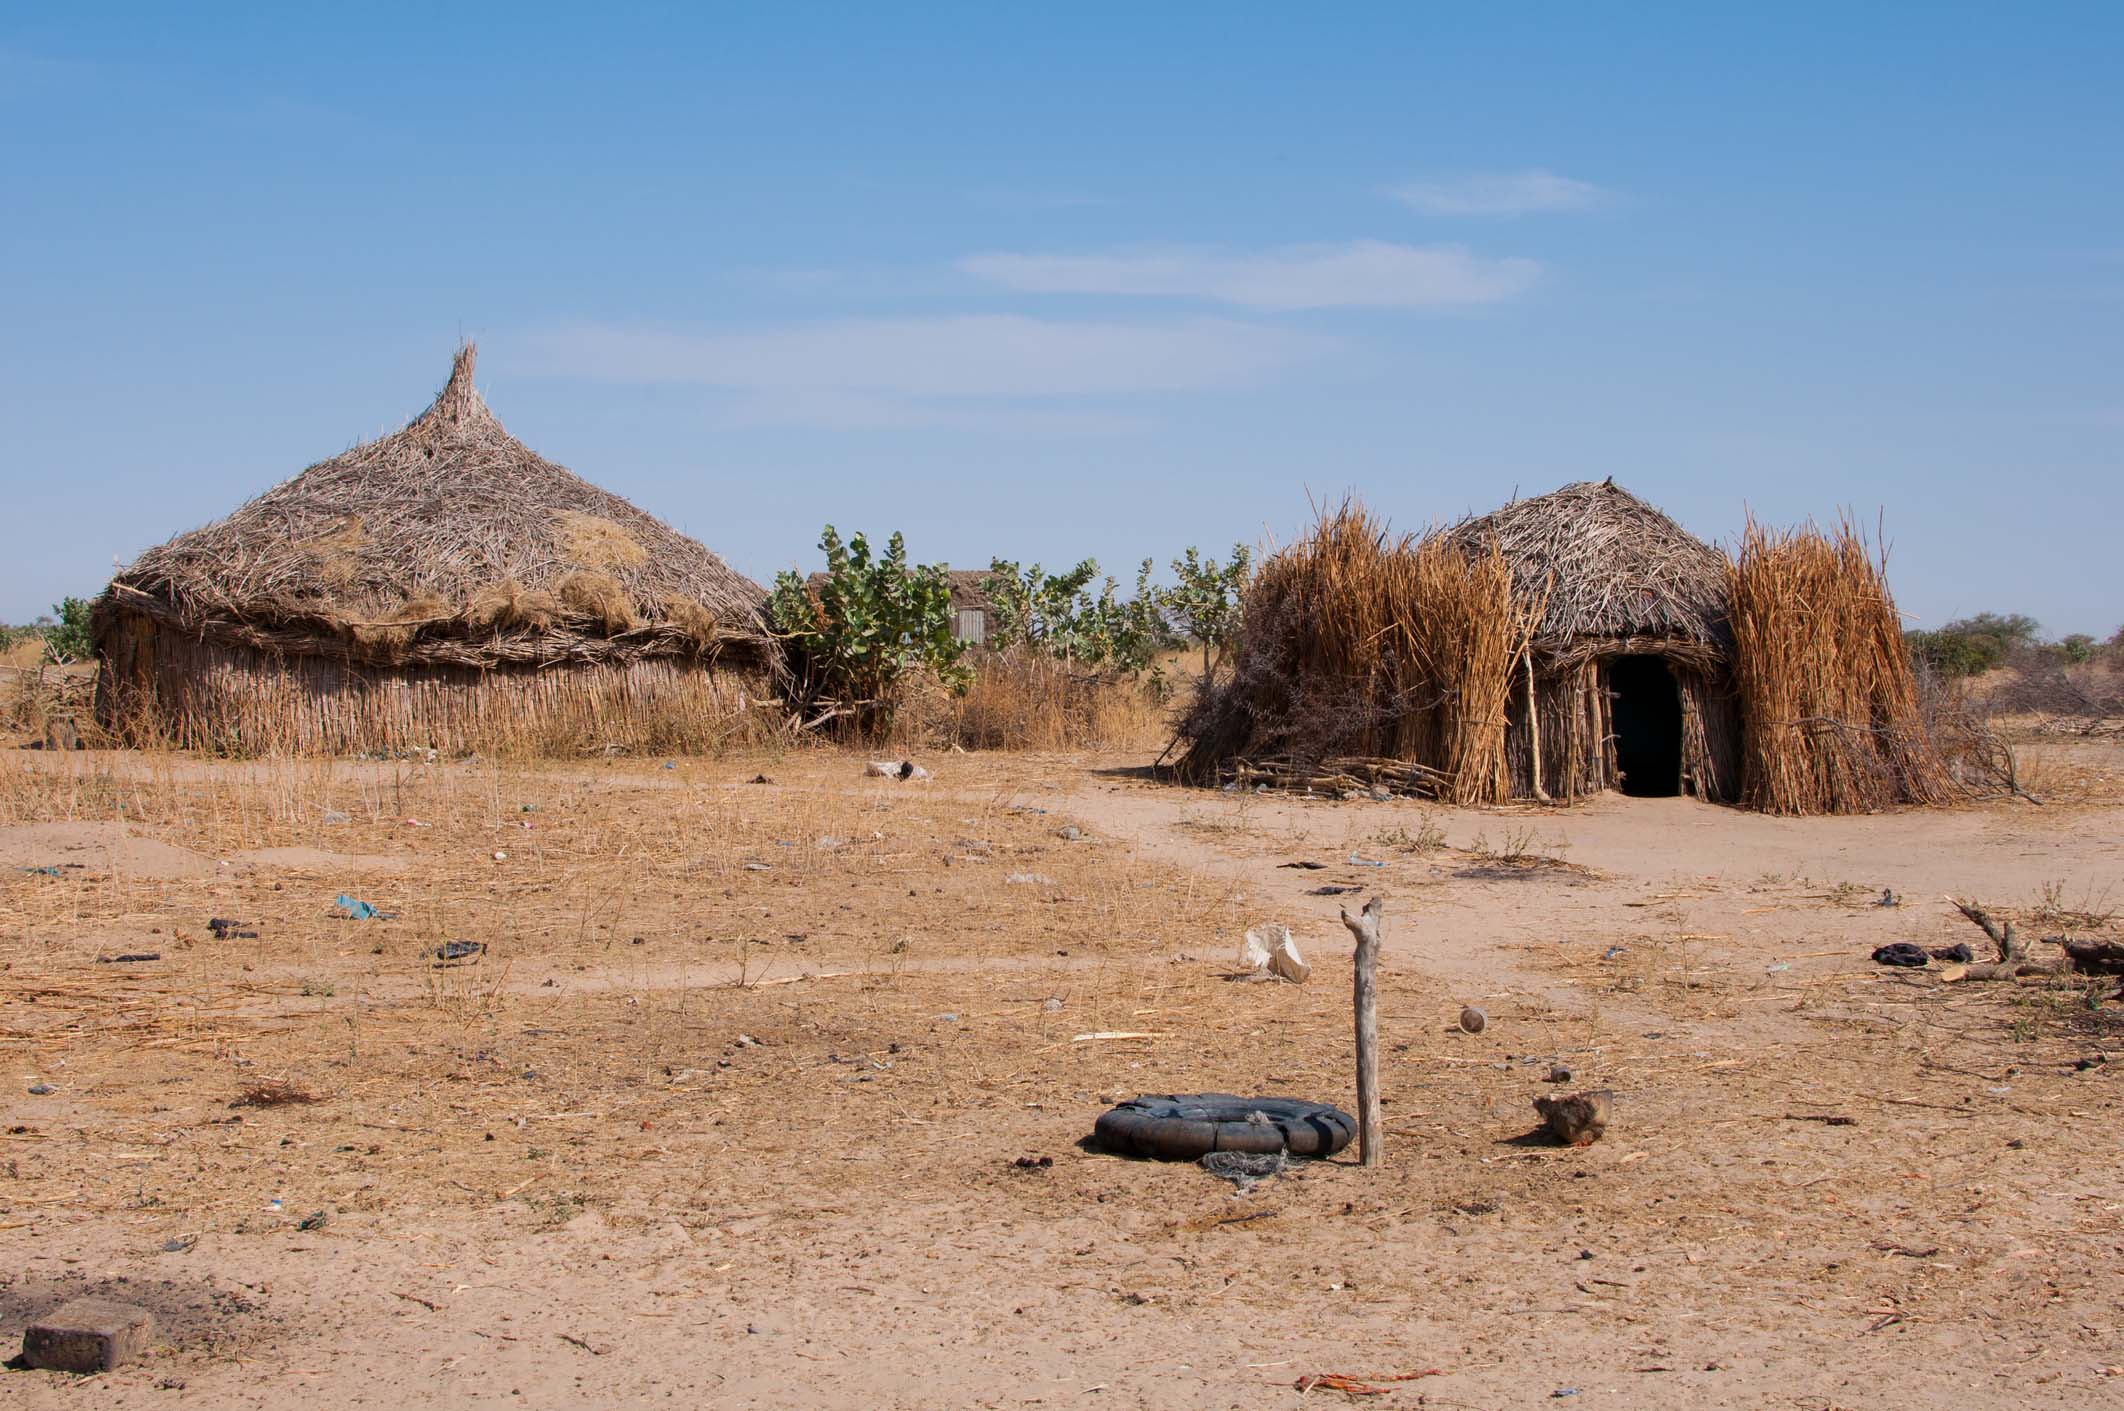 Nomadic huts in Chad